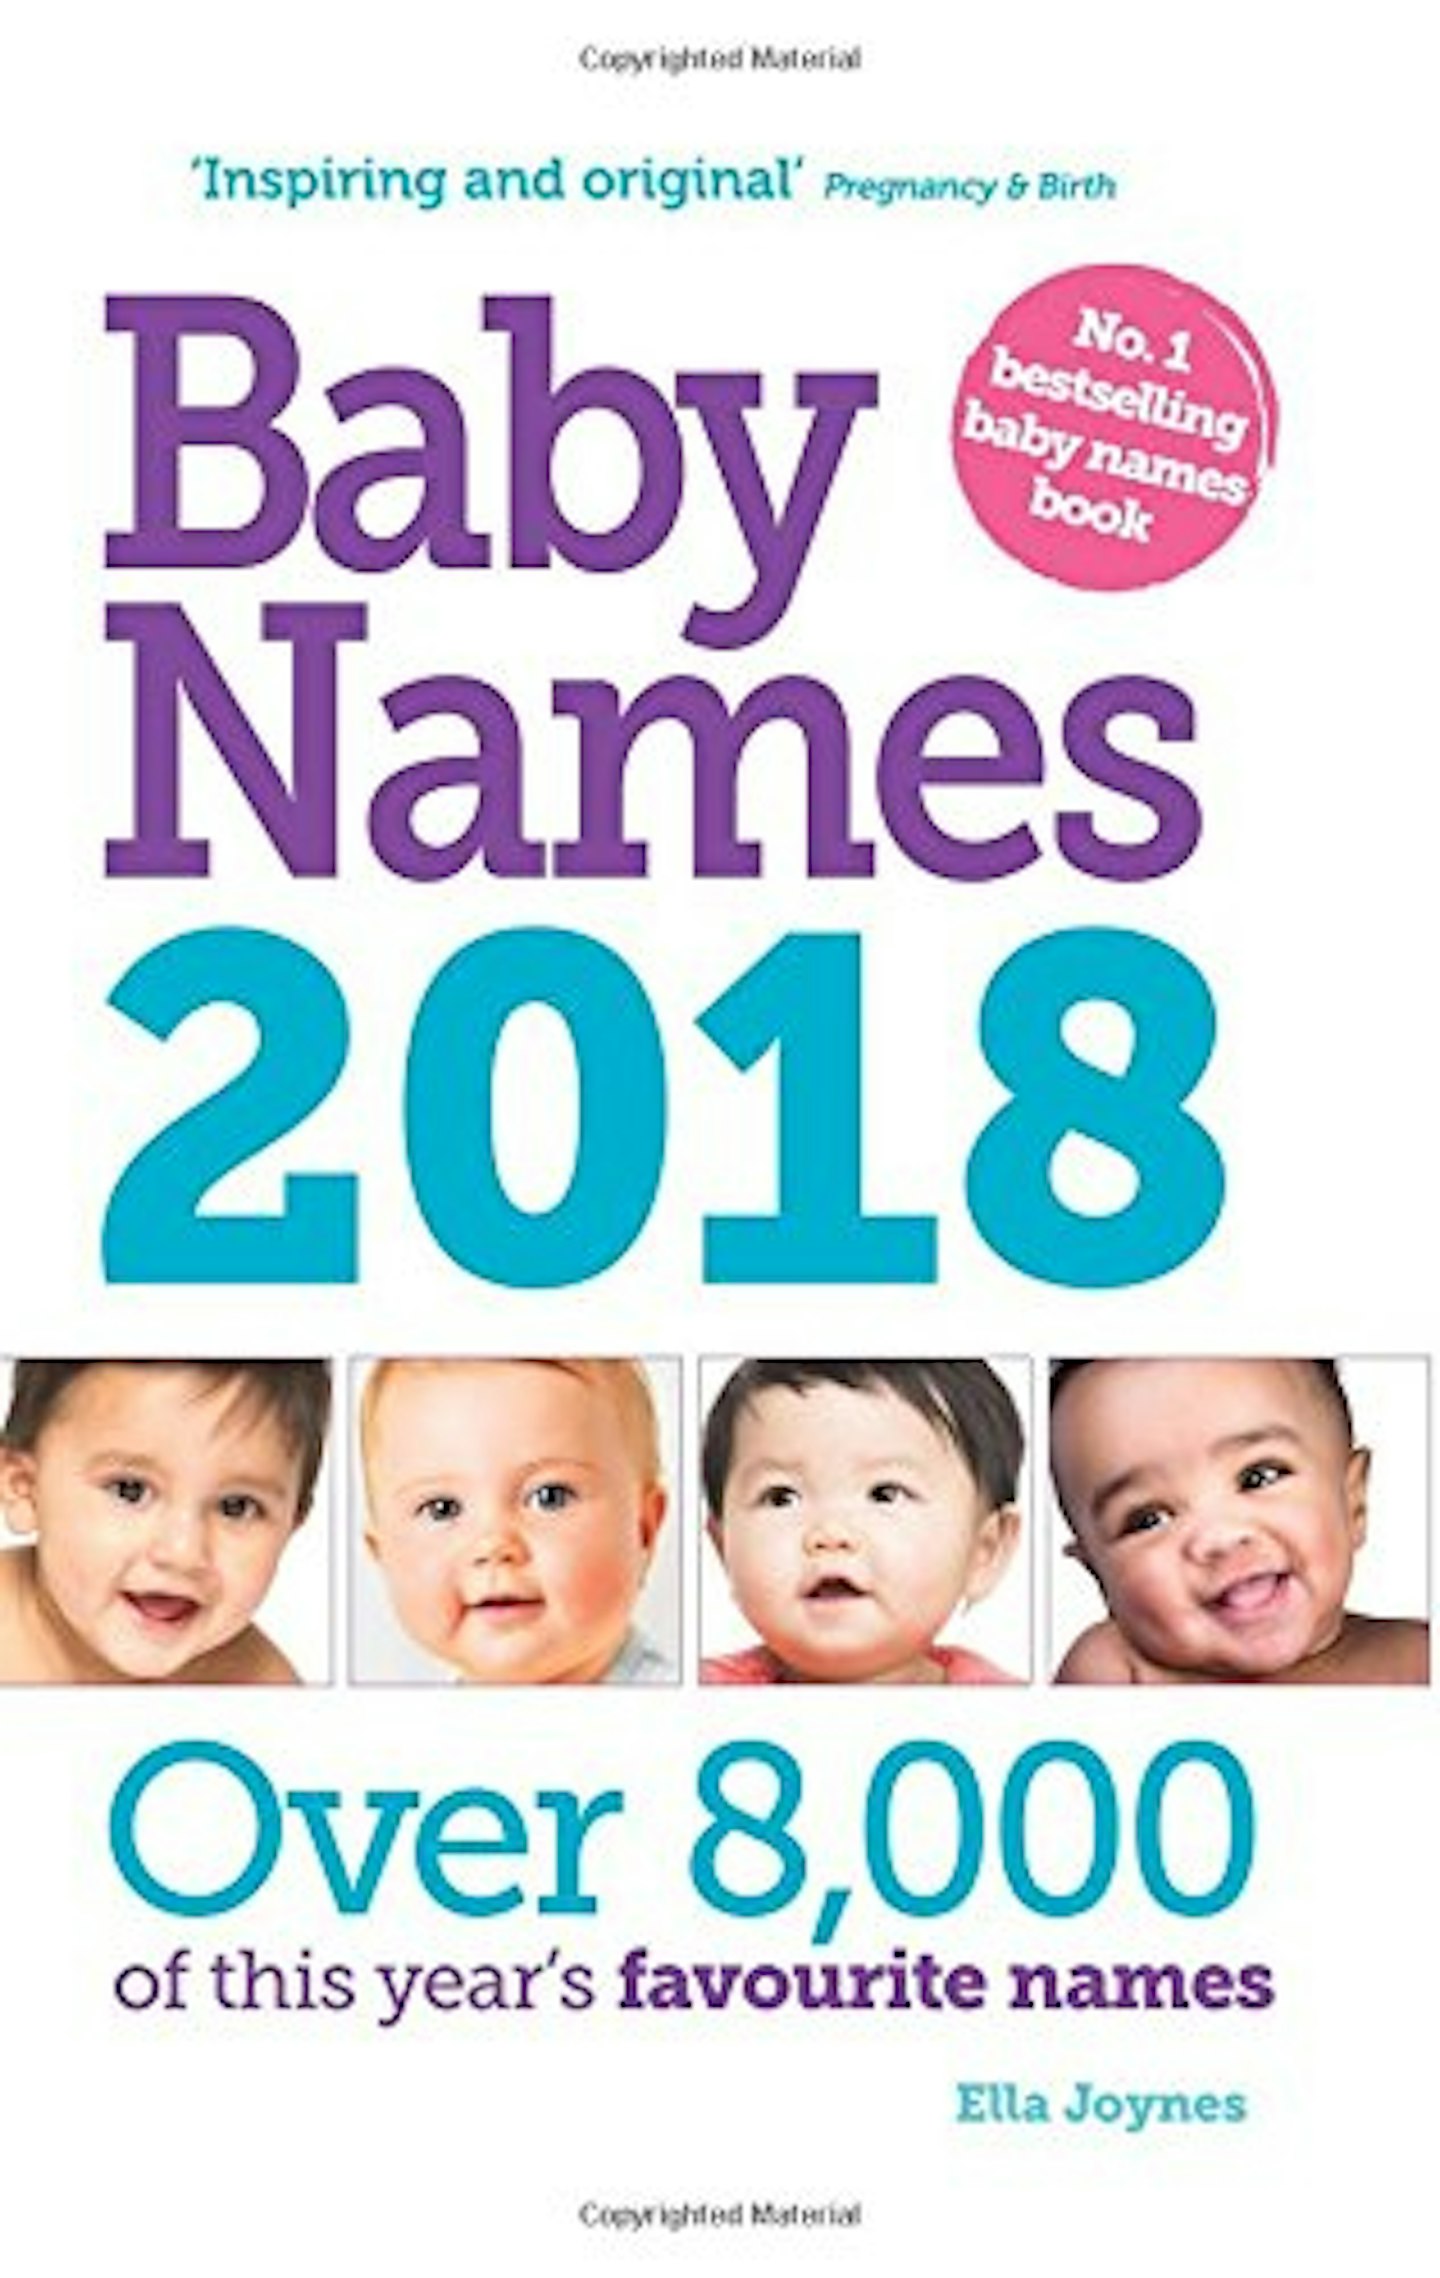 Baby names 2018